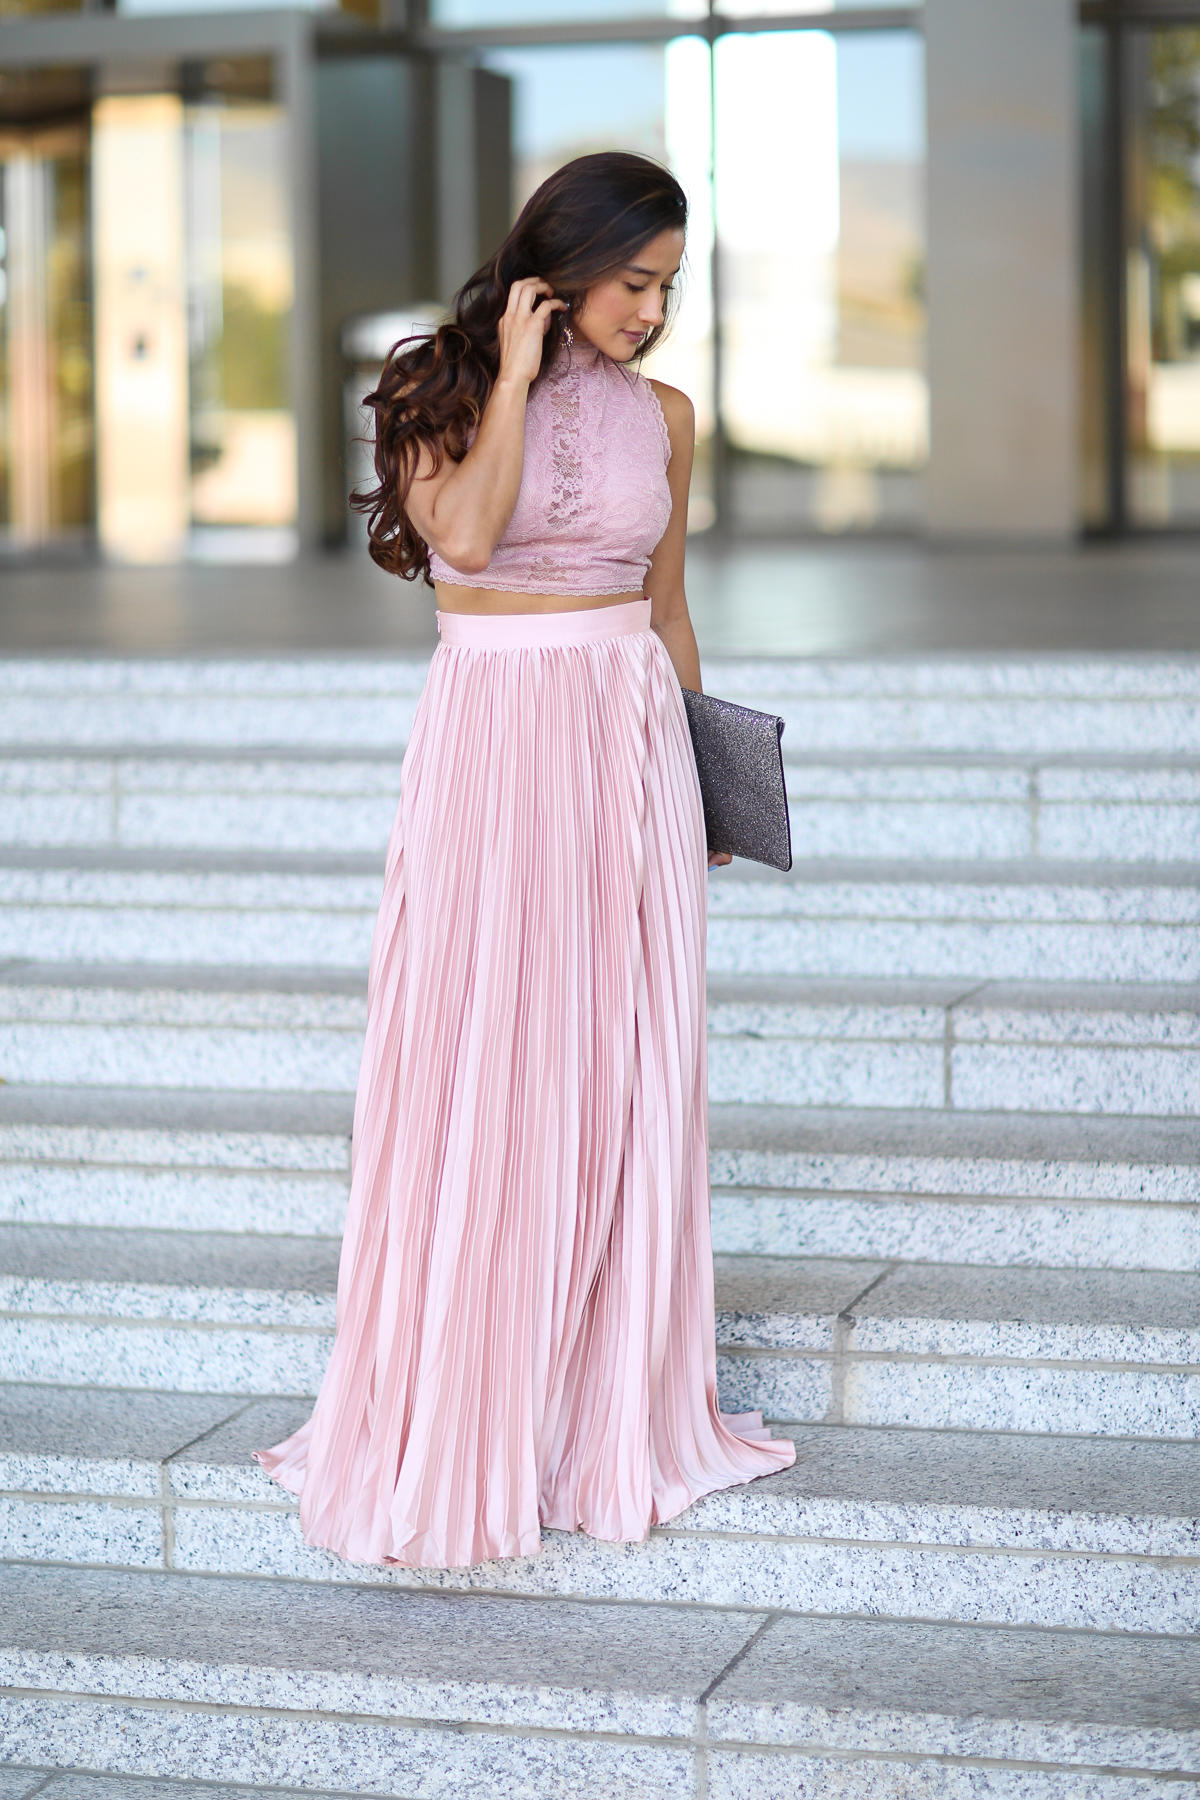 StilettoConfessions- Shein Pink Pleated 